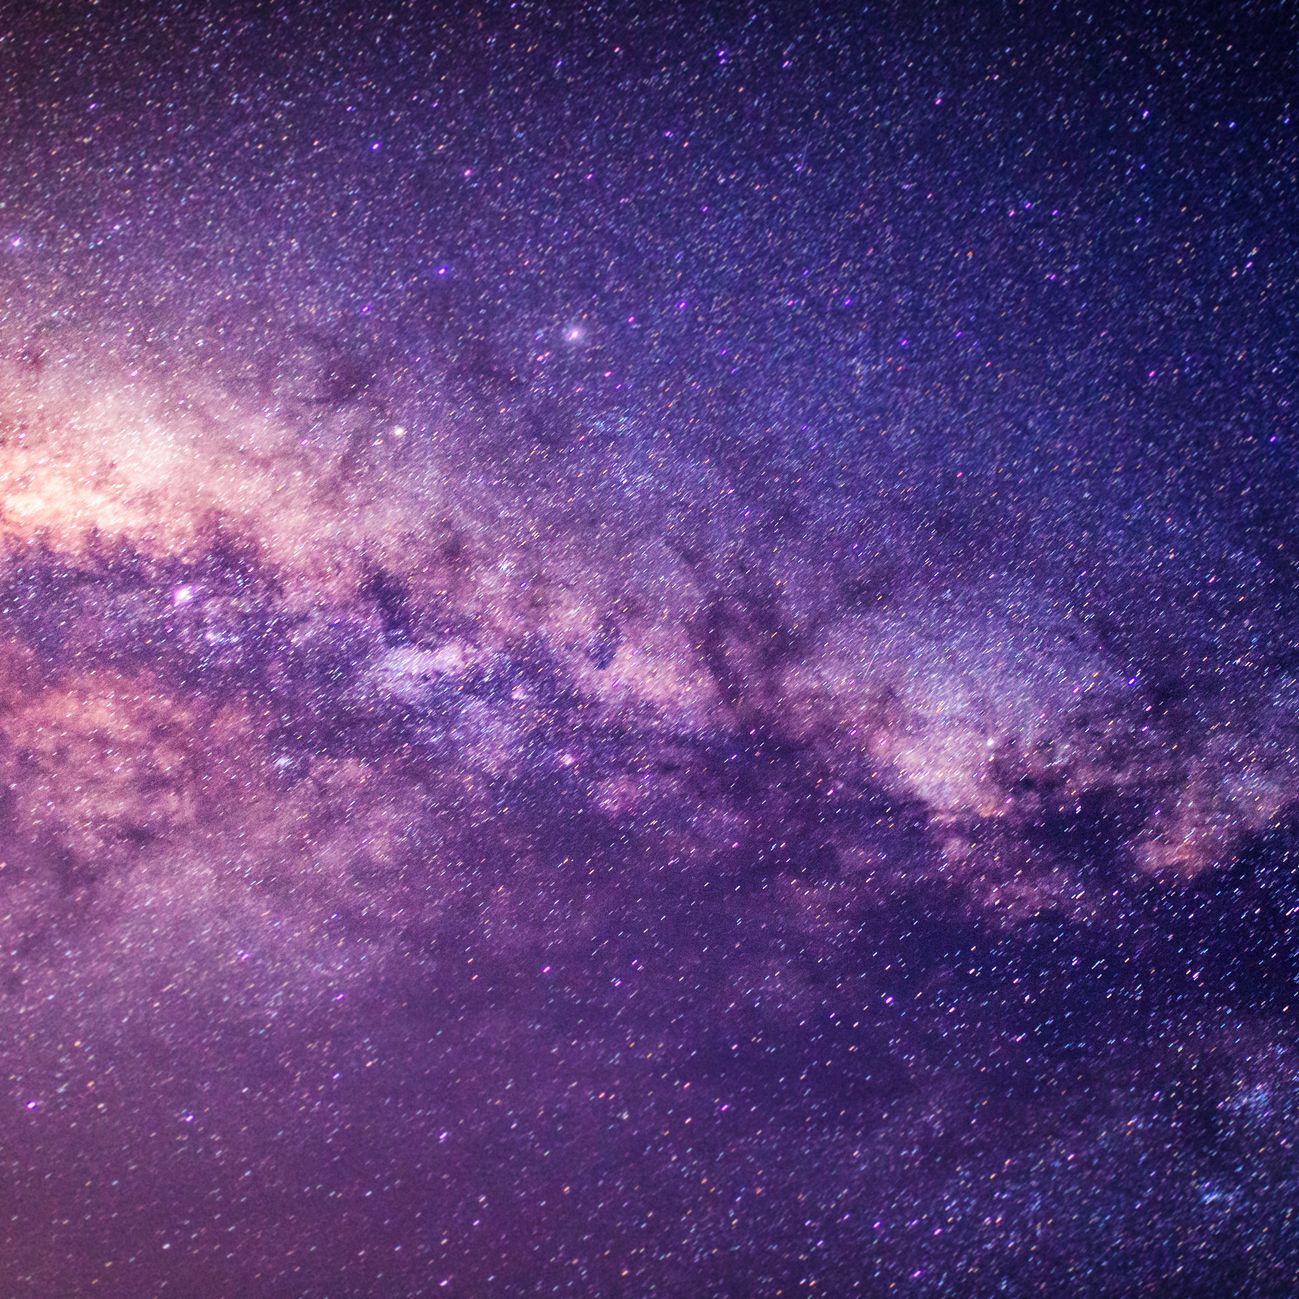 The Center of the Milky Way Might Not Be a Black Hole After All